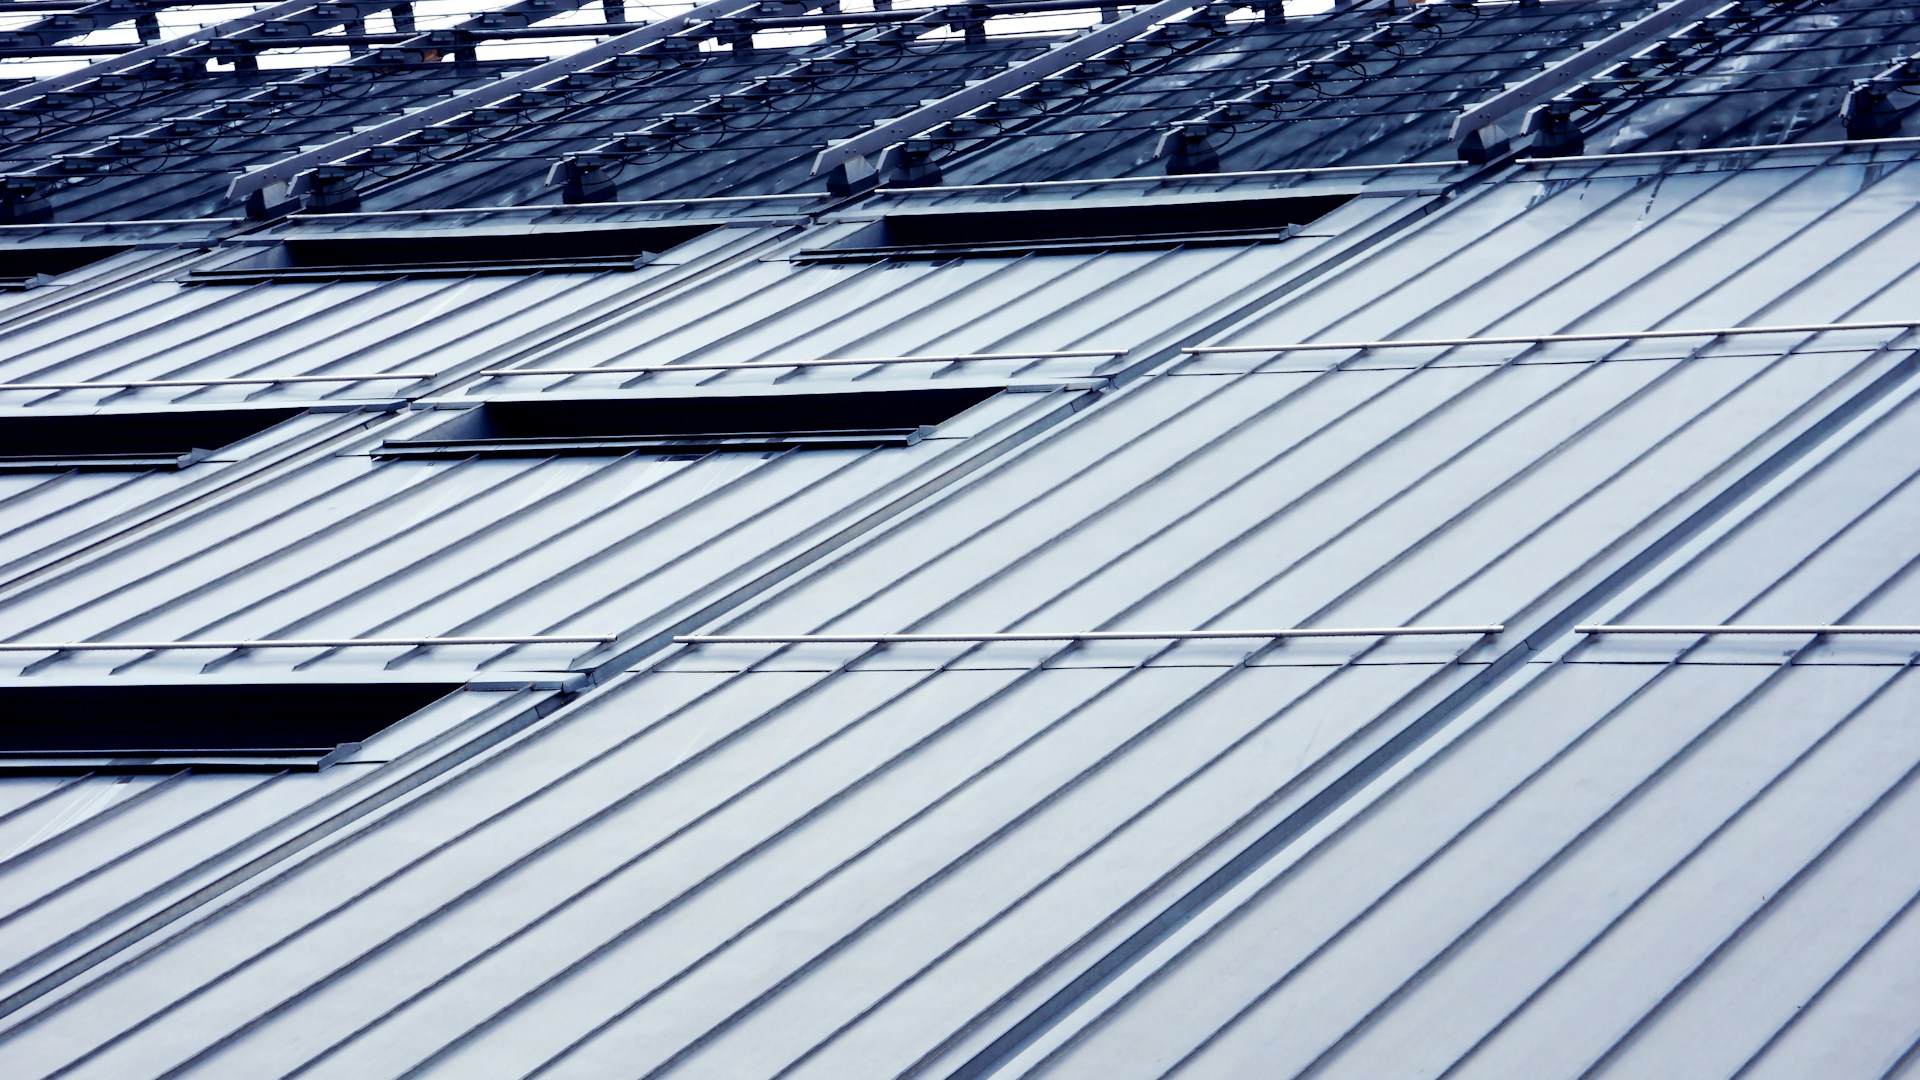 Roofing's Evolution: Taking Up Innovative Technologies and Safety